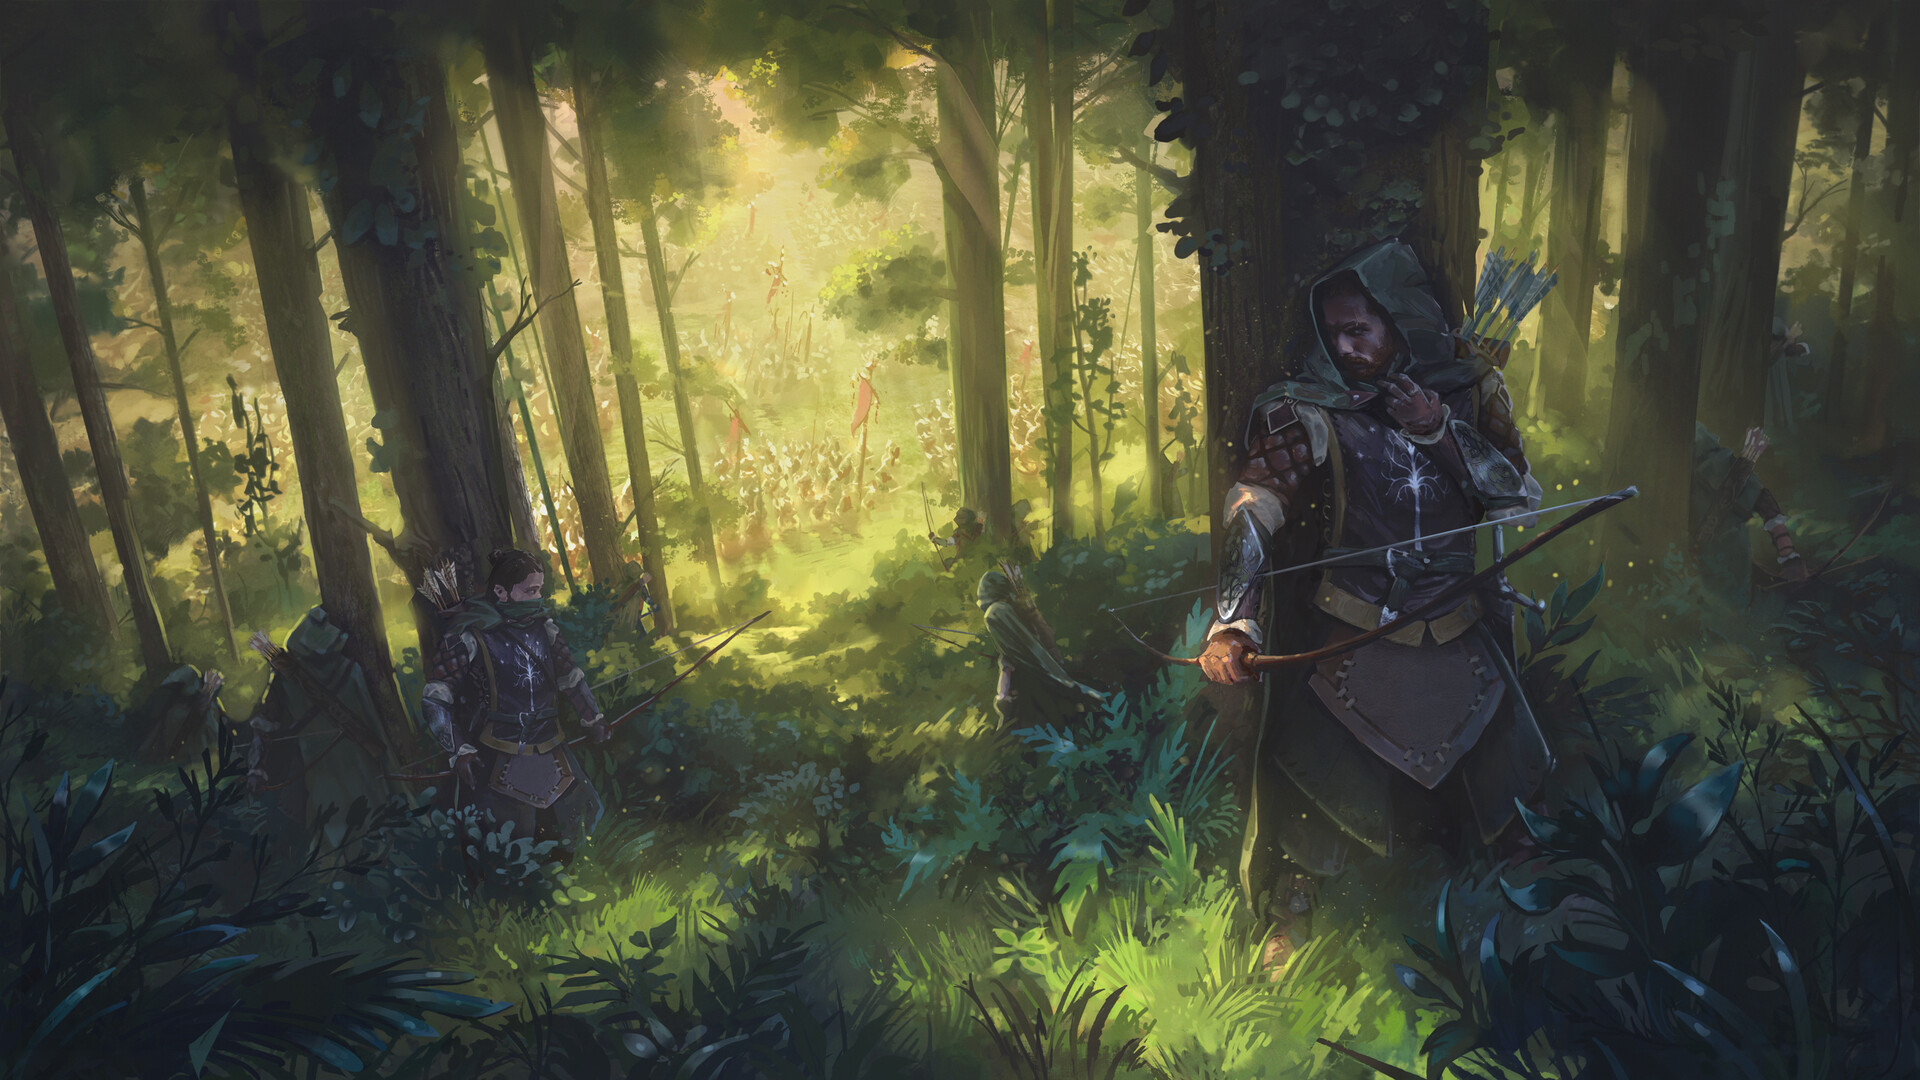 Nikolay Timofeev Drawing Archer Forest Army Hoods Bow And Arrow The Lord Of The Rings 1920x1080